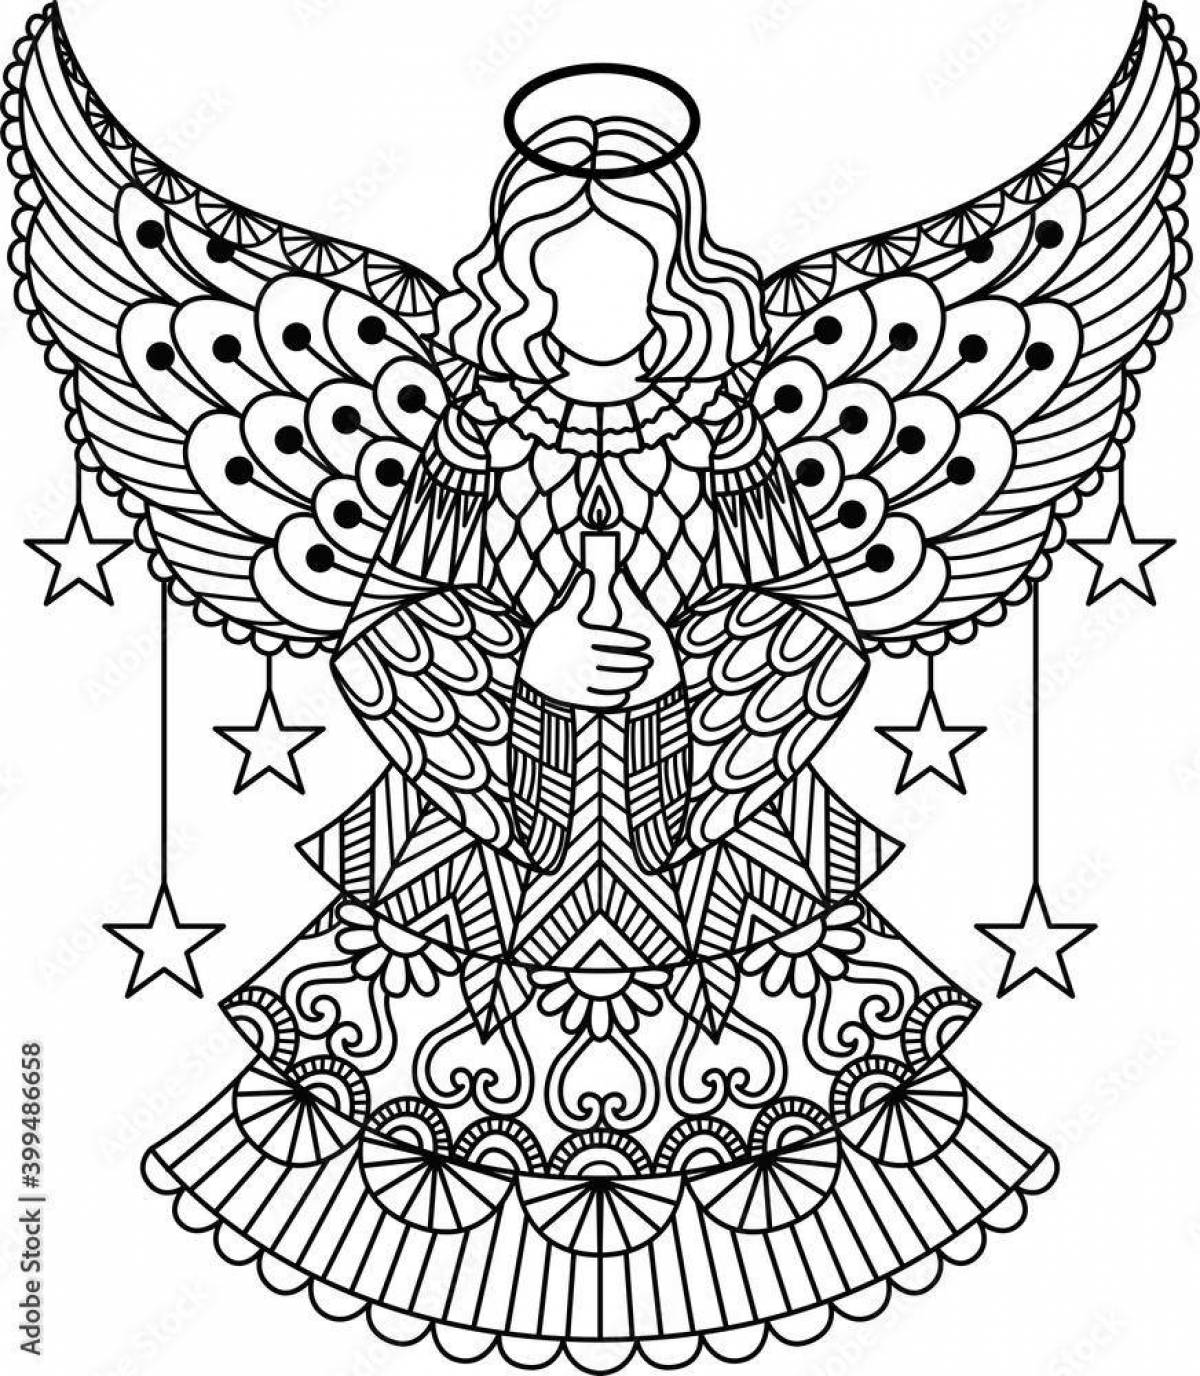 Exquisite angel antistress coloring book